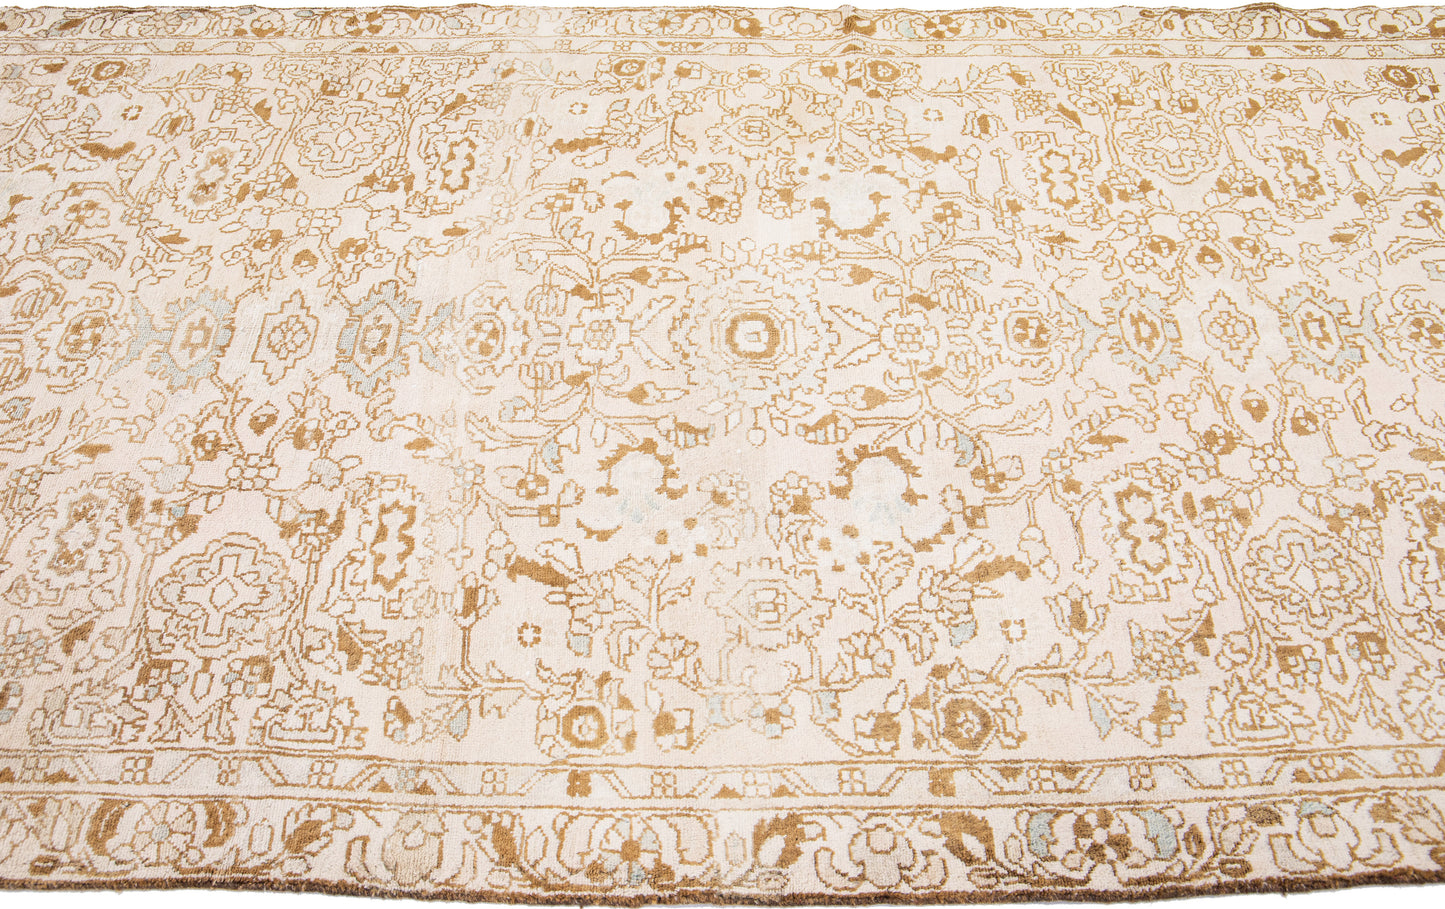 Close up of beige wool rug with floral designs and interwoven patterns